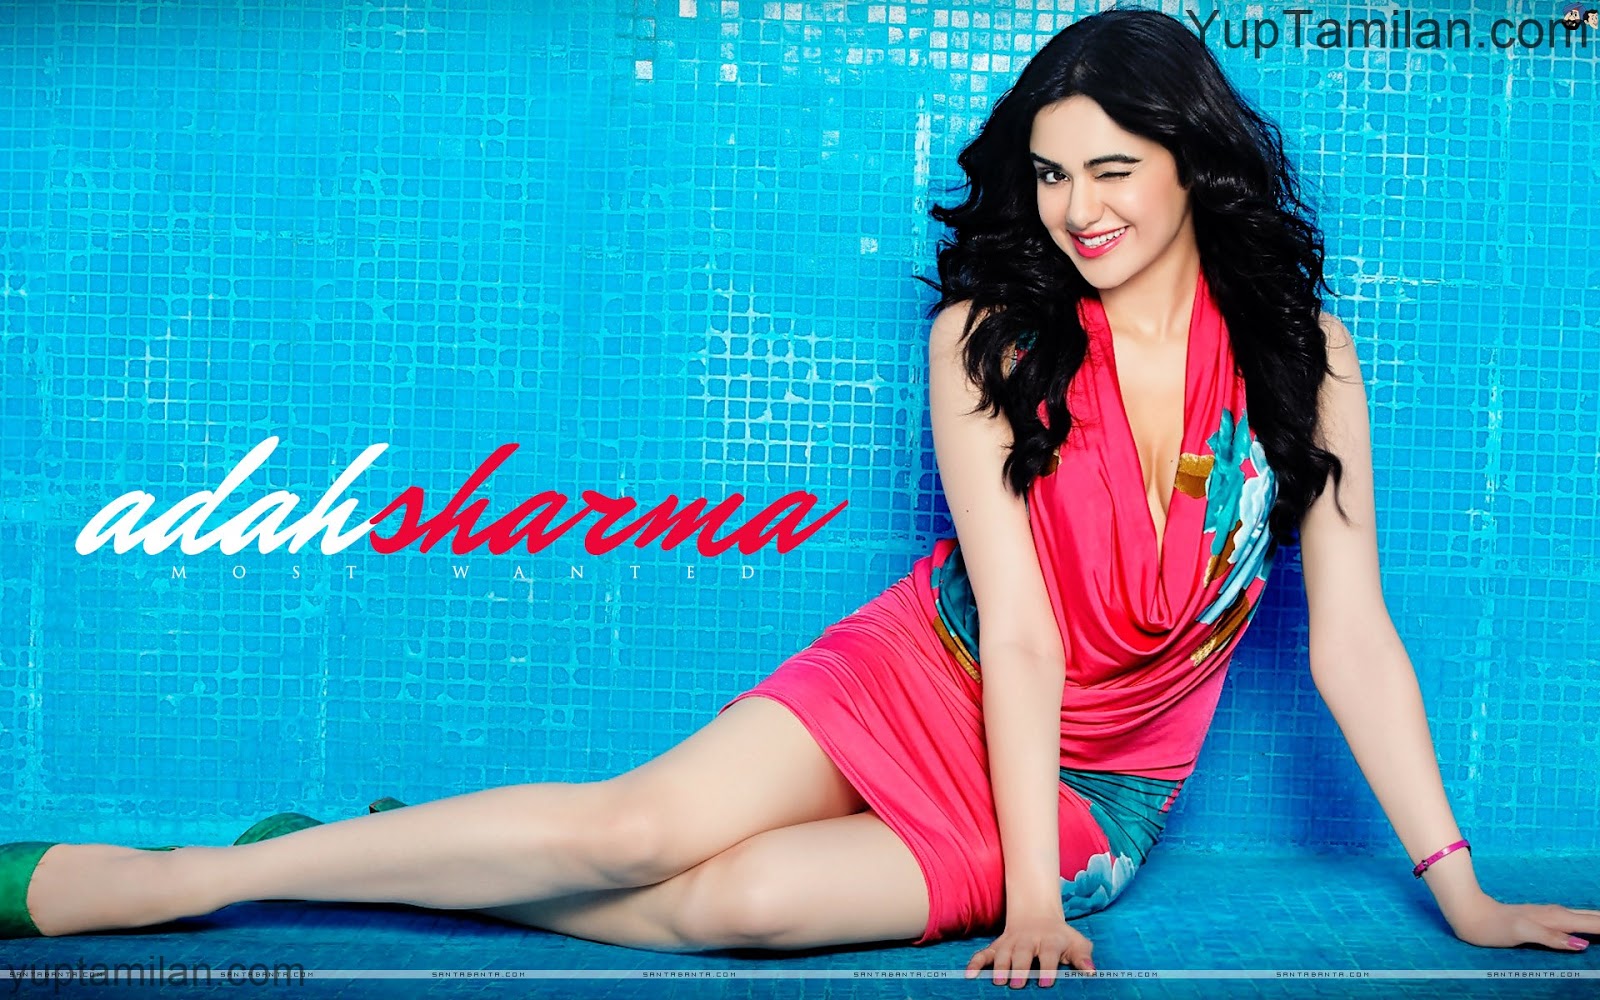 Adah Sharma 40 Hd Wallpapers Sexiest Photo Collection